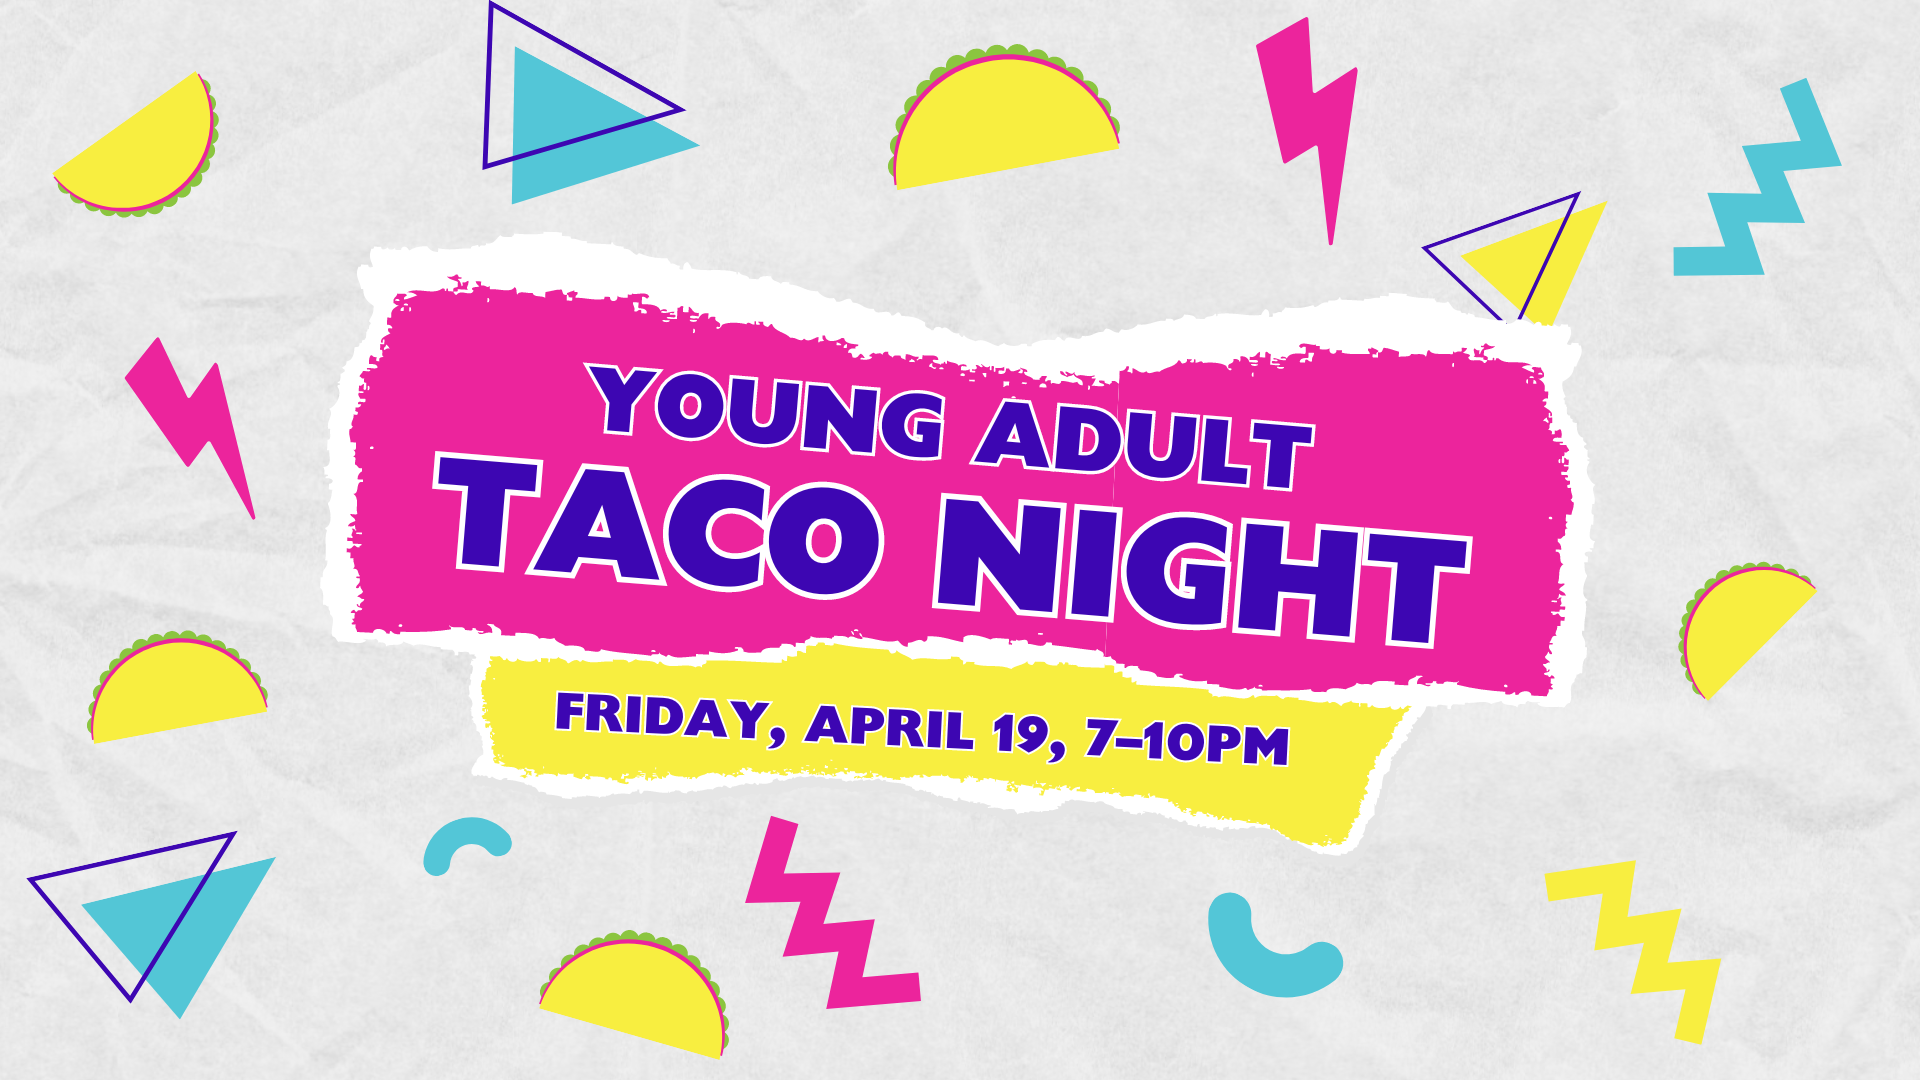 Young Adult Taco Night